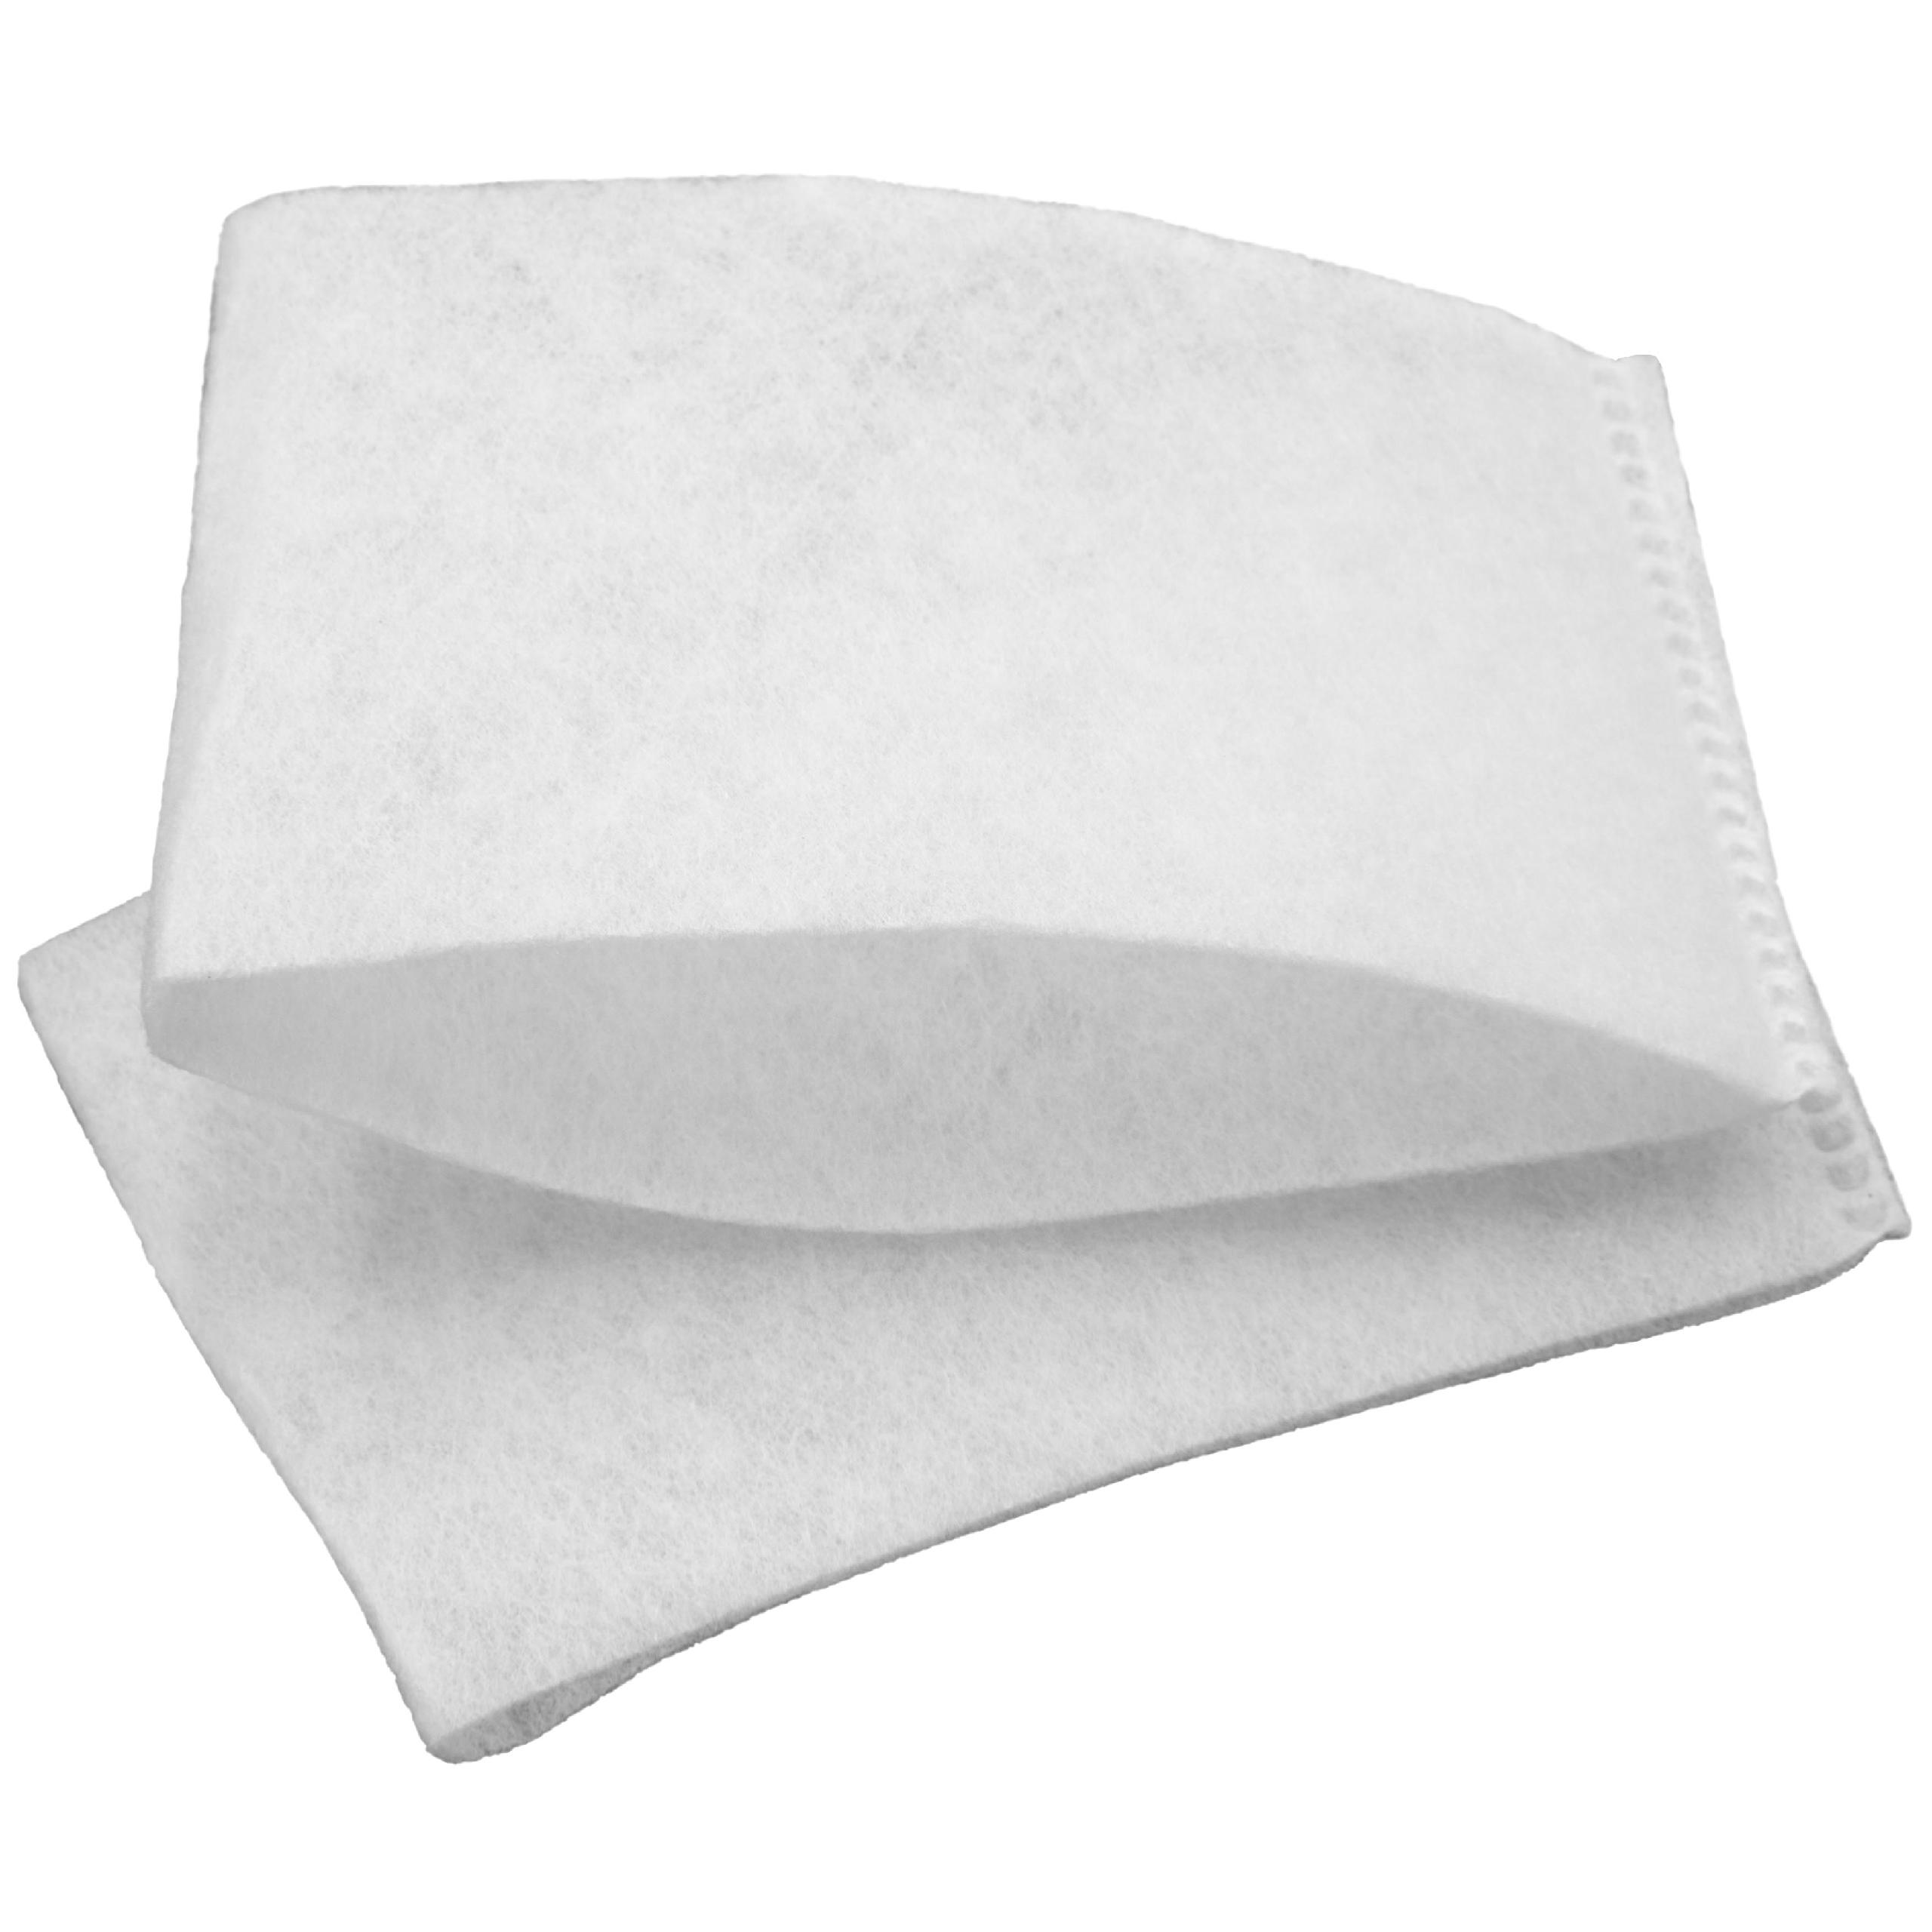 Set 2x Filter Sleeves replaces Dirt Devil 2725077 for Dirt Devil Vacuum Cleaner - Filter Protection White